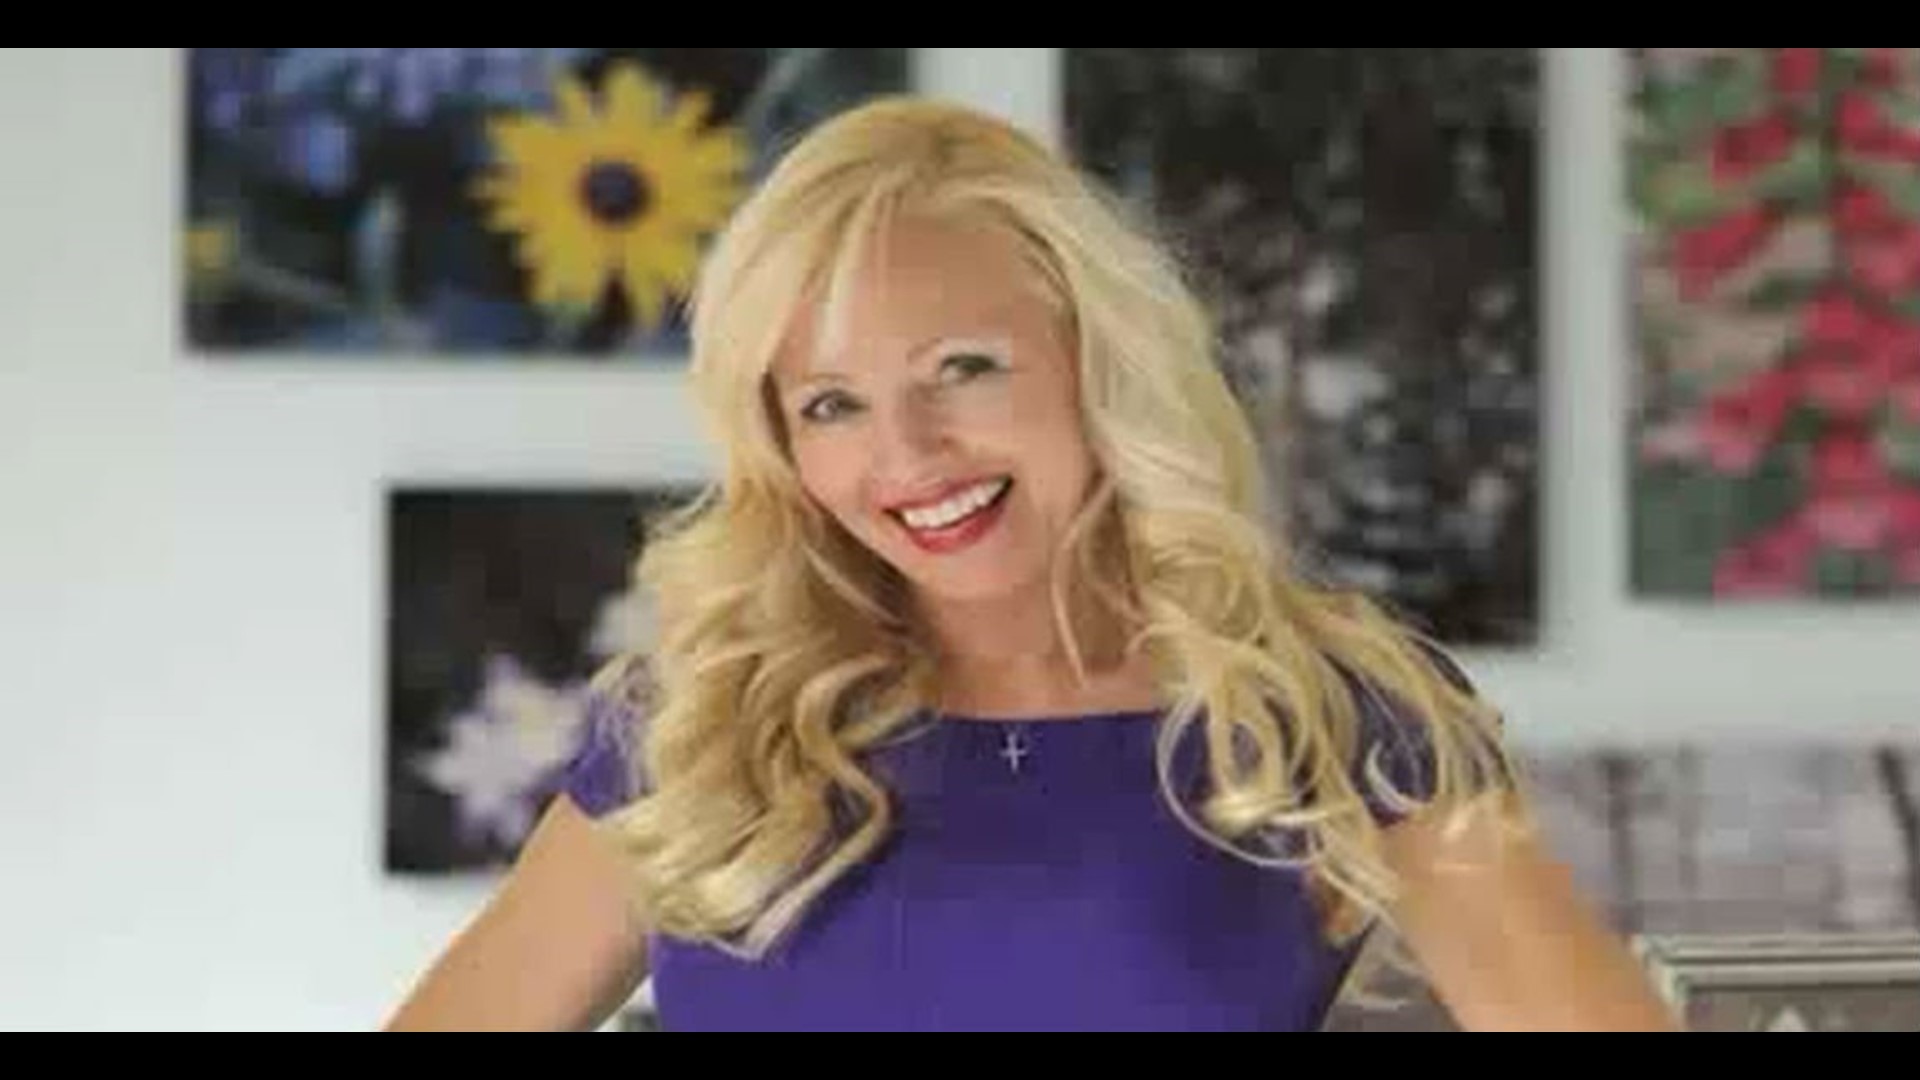 Former Oldest Nfl Cheerleader Accused Of Raping 15 Year Old Boy 0011